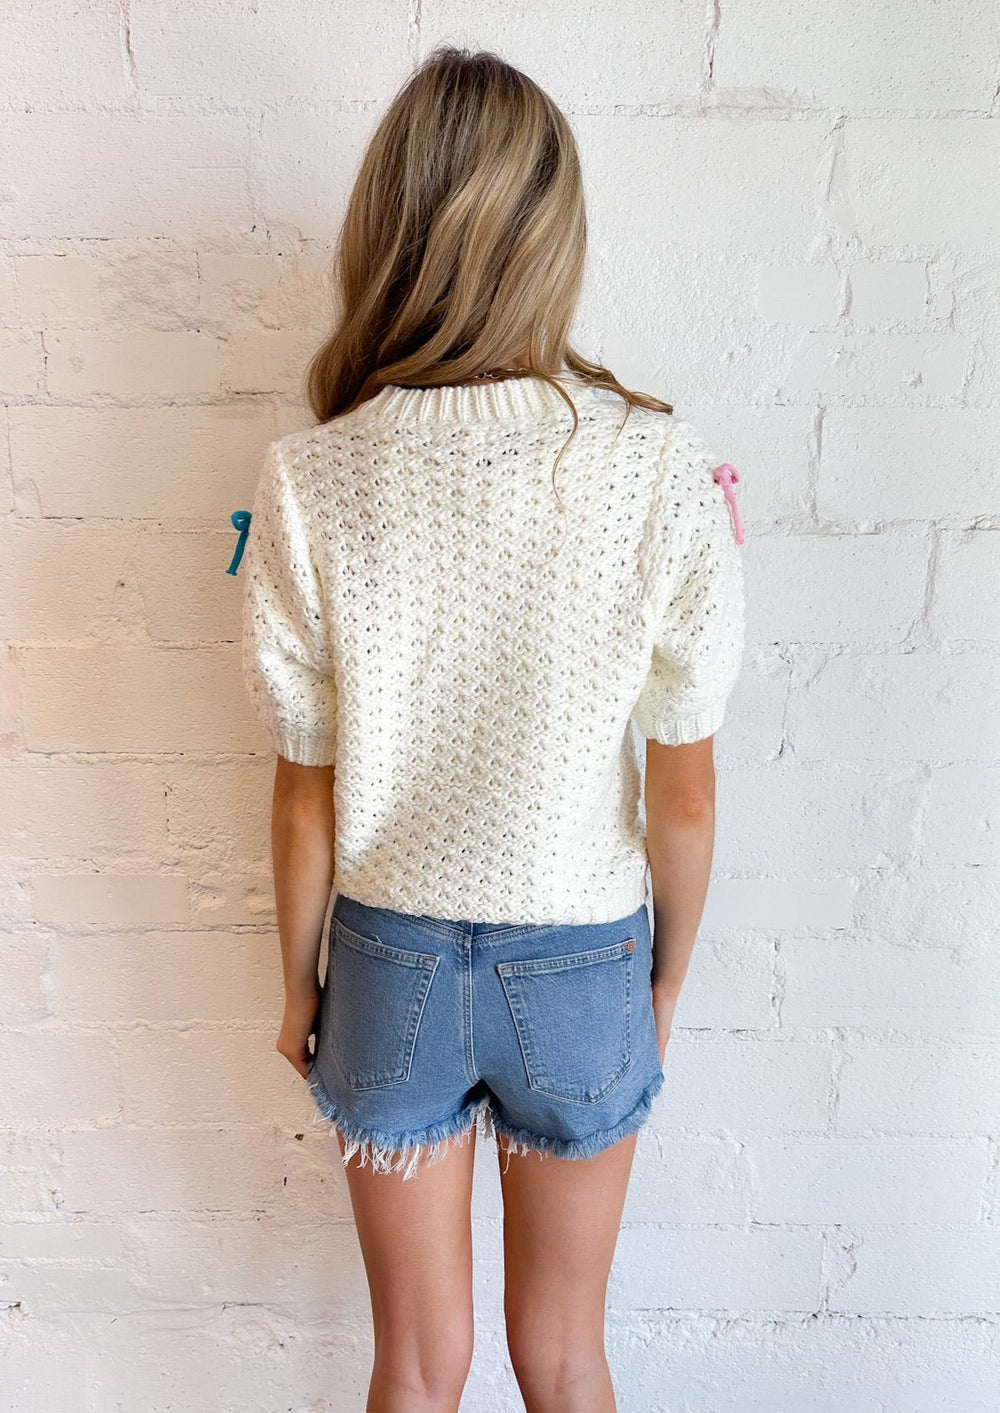 Bow Girly Knit Top, Tops, Adeline, Adeline, dallas boutique, dallas texas, texas boutique, women's boutique dallas, adeline boutique, dallas boutique, trendy boutique, affordable boutique